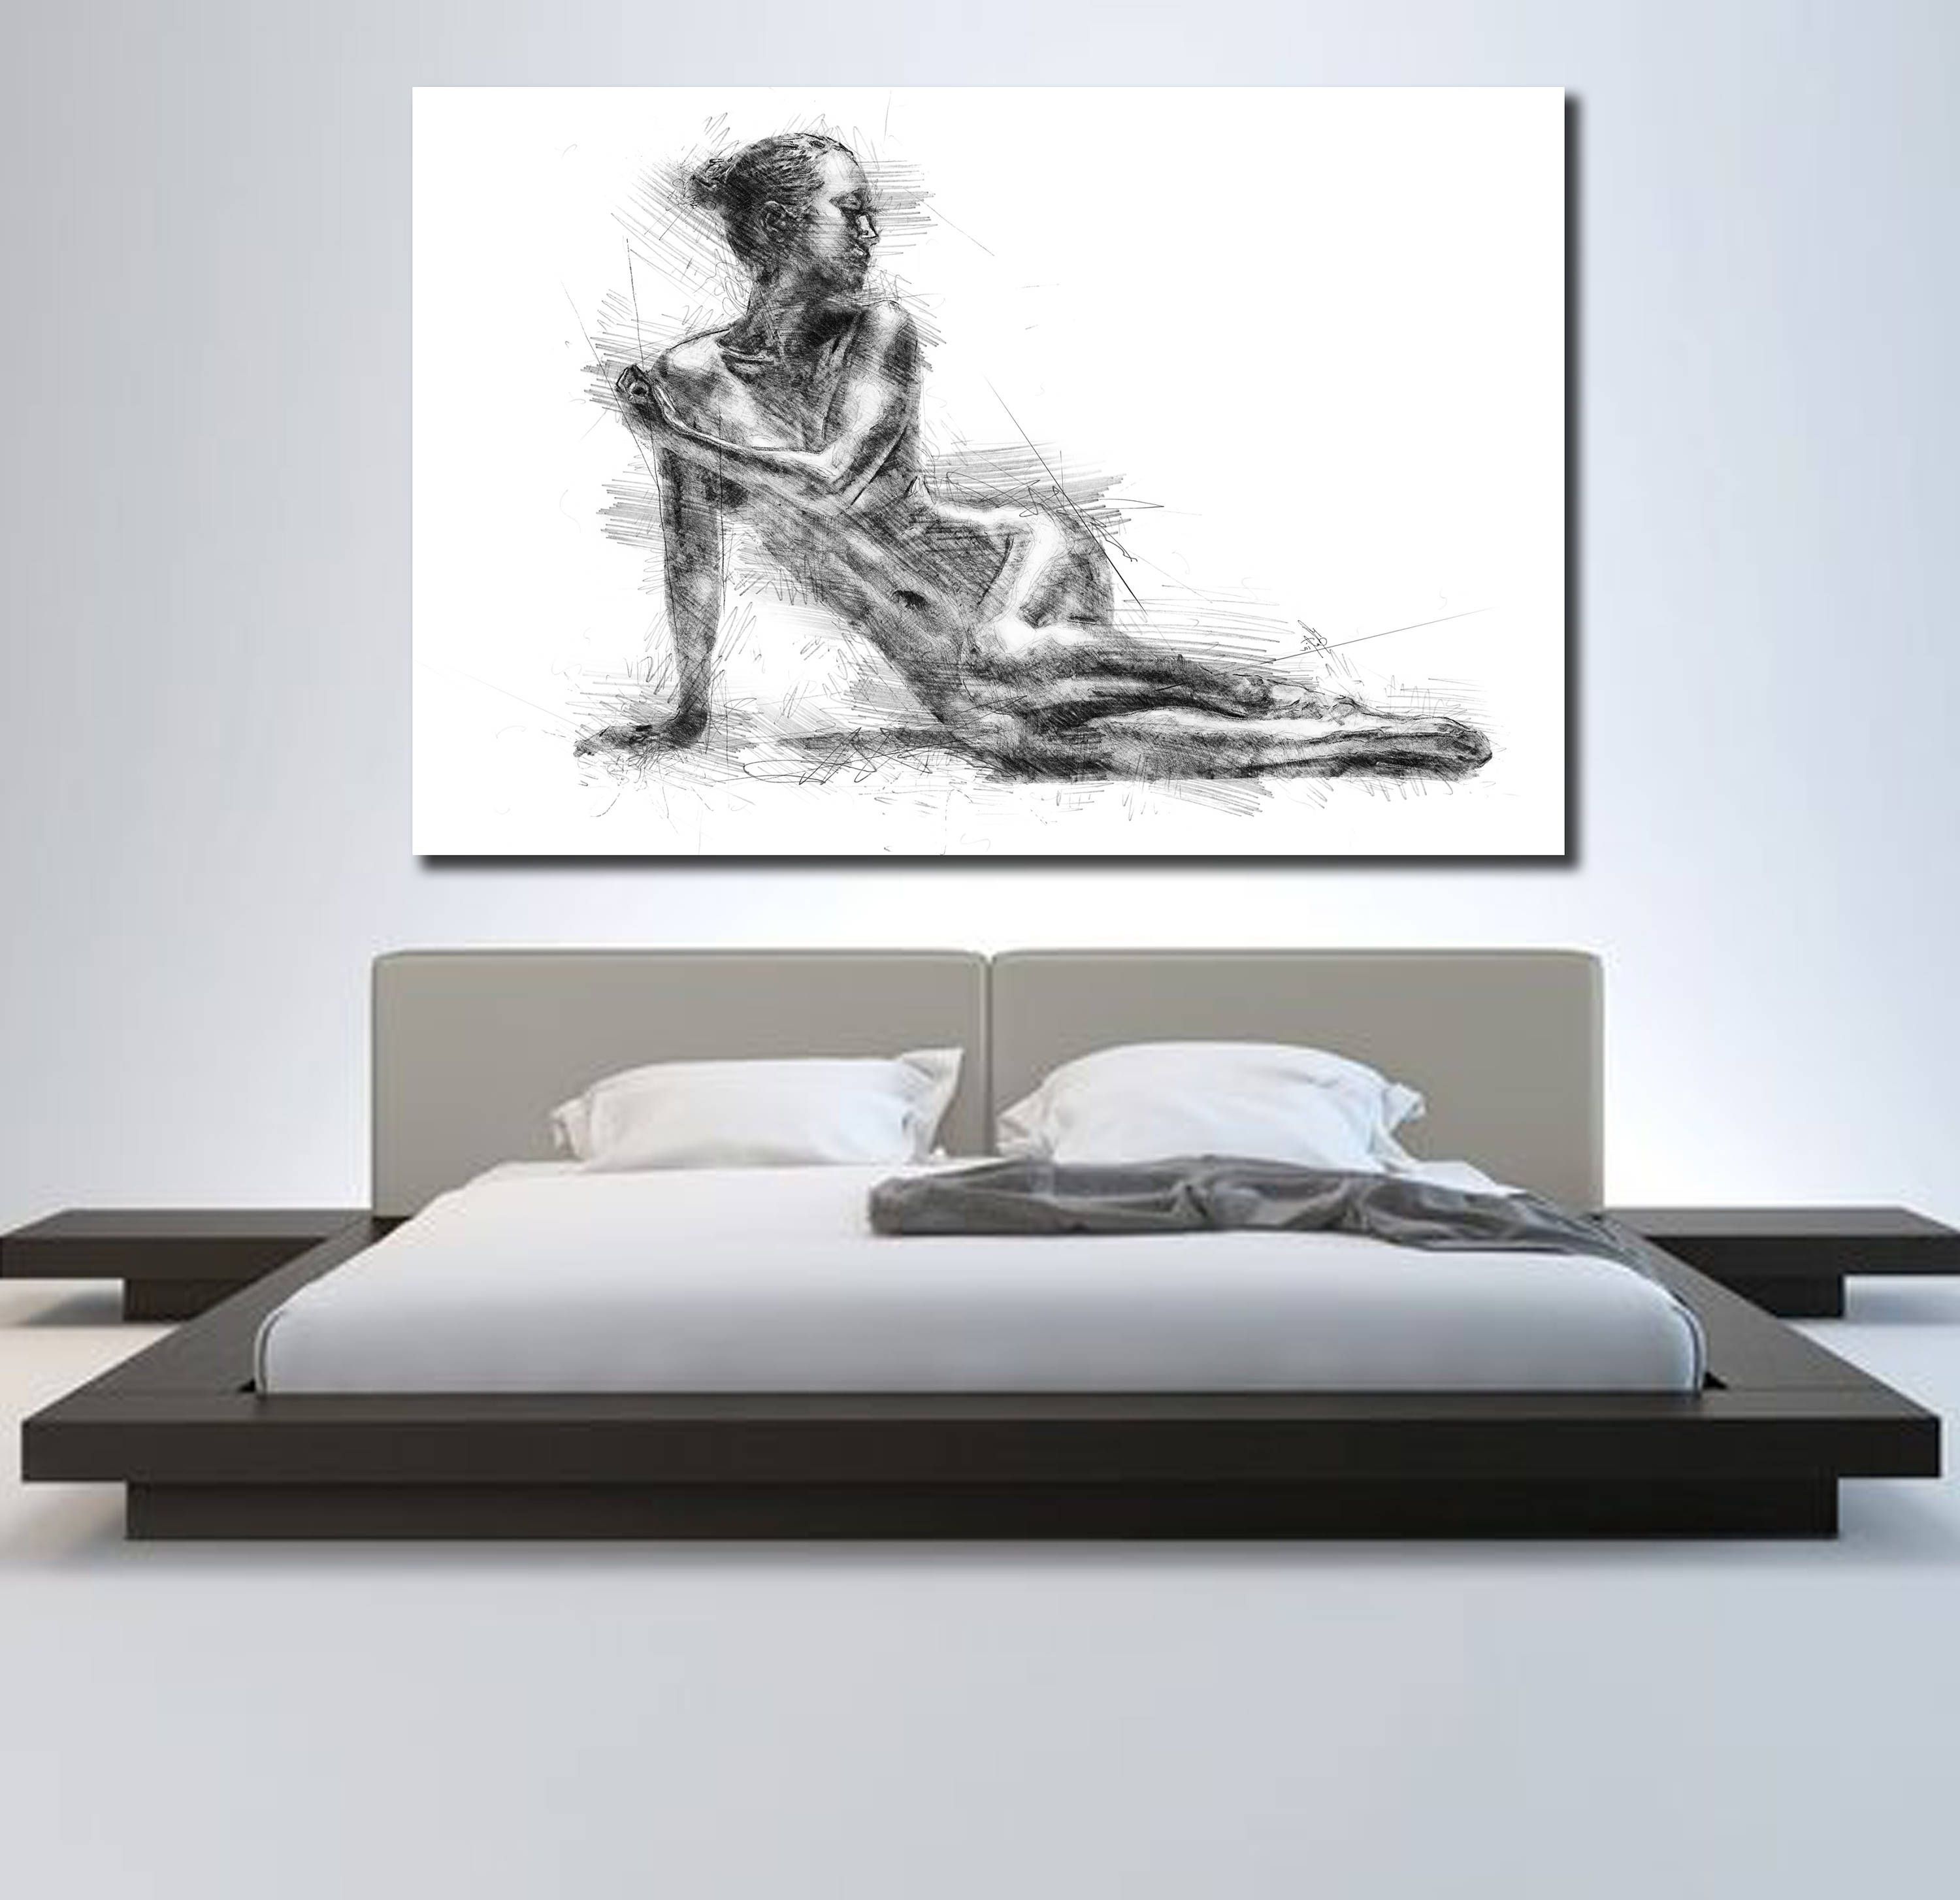 Canvas Art Bedroom Wall Decor, Elegant Contemporary Abstract Canvas Throughout Most Recently Released Wall Art For Bedroom (View 14 of 15)